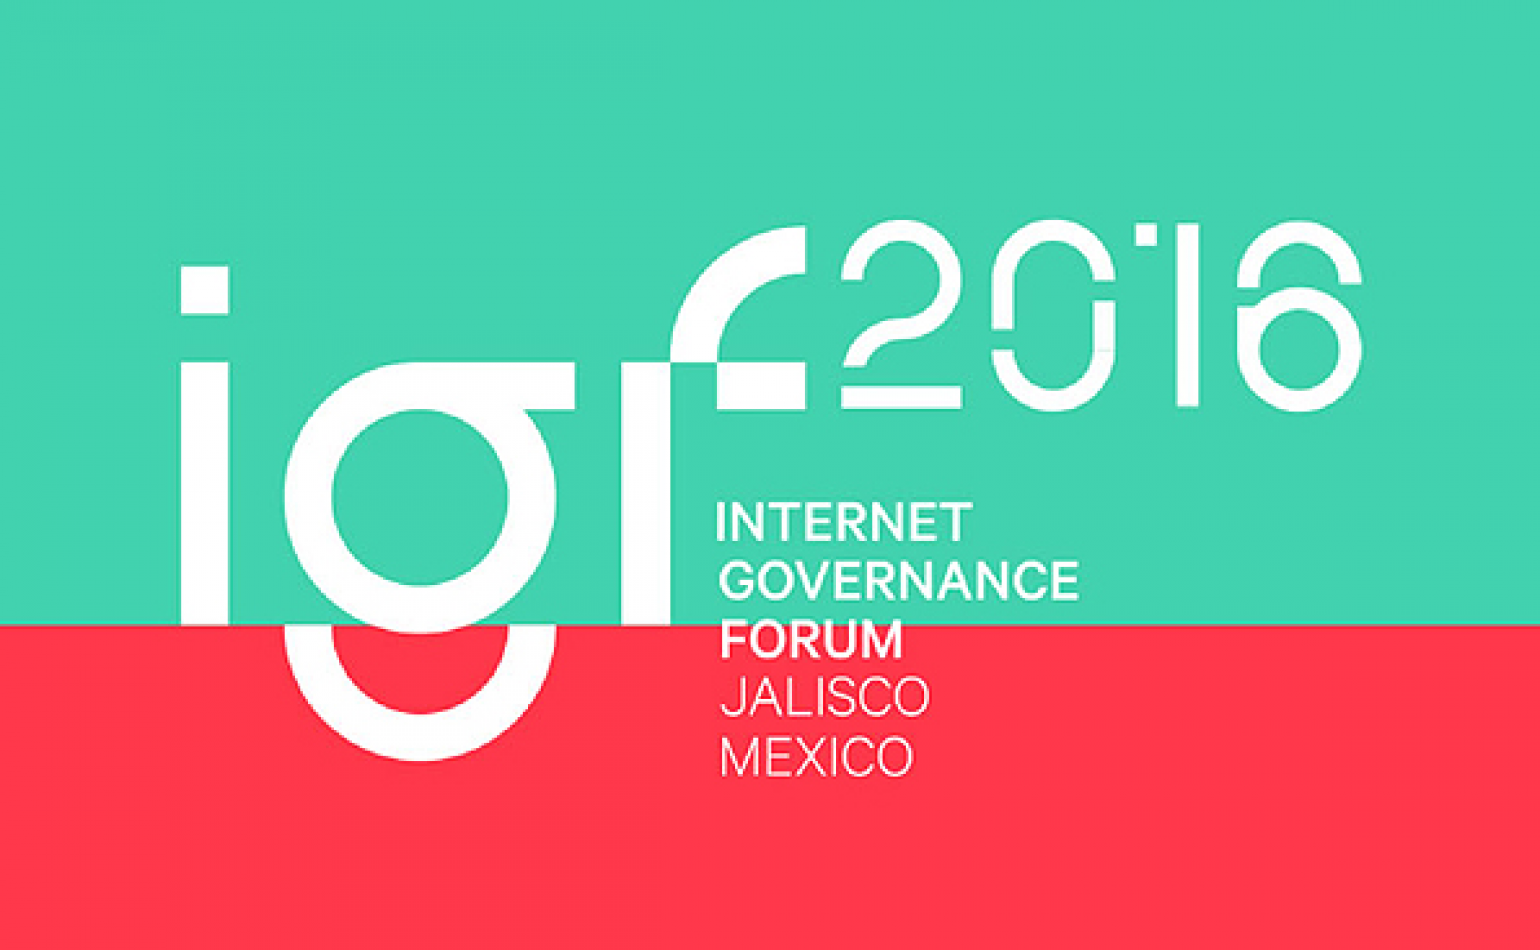 ‘Technological Solutions for Countering Gender Based Harassment’ – a session hosted by Media Matters for Democracy at Internet Governance Forum 2016 in Guadalajara Mexico